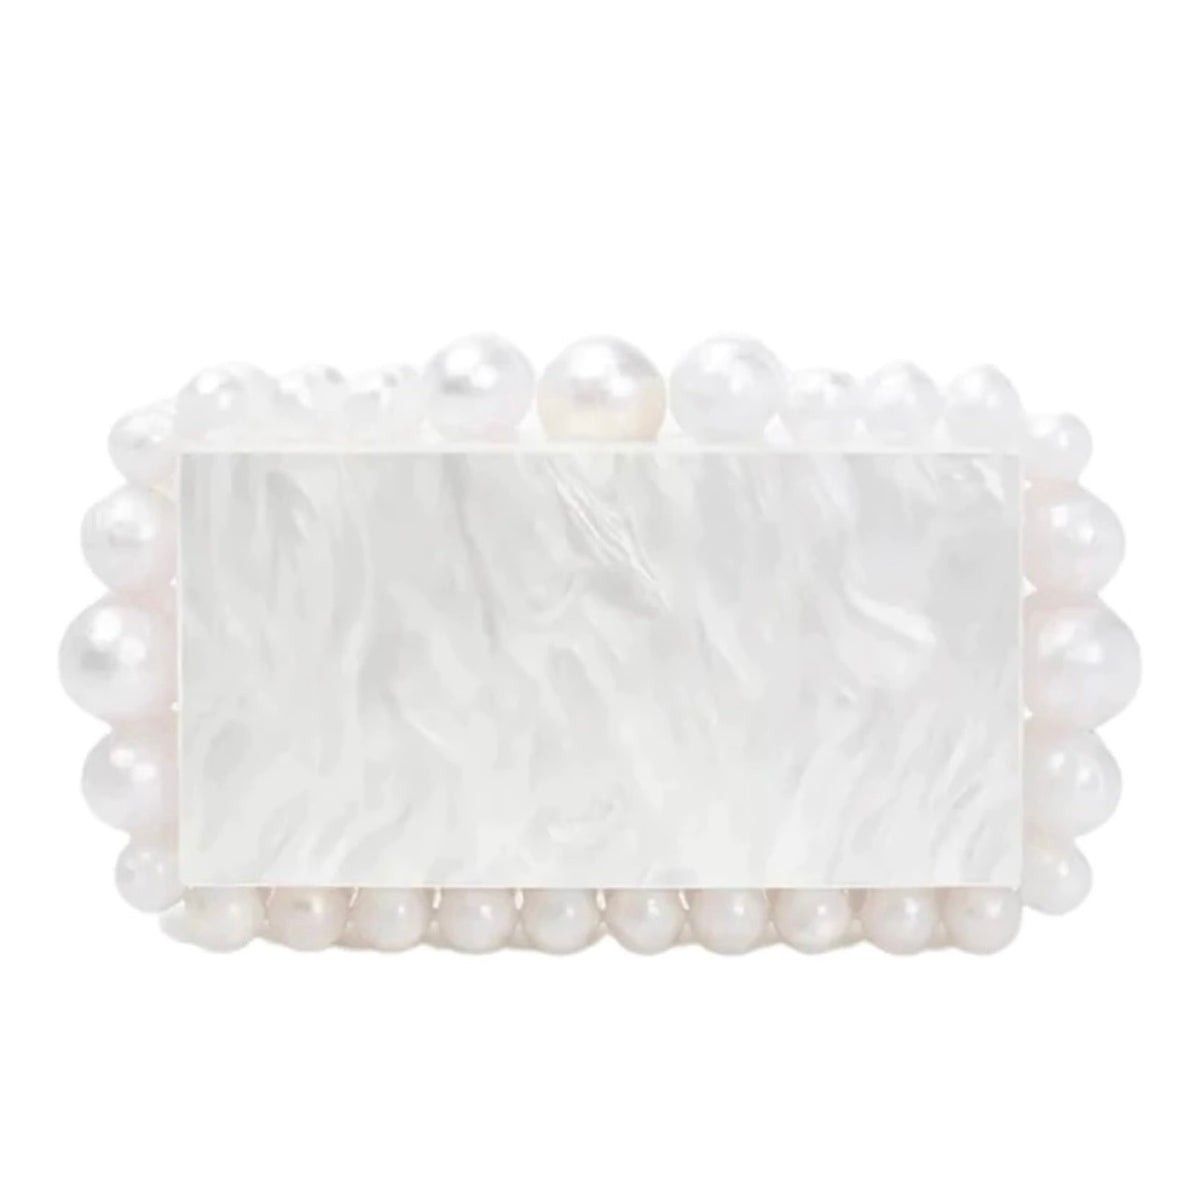 Marbled White Acrylic Bubble Clutch | Sea Marie Designs